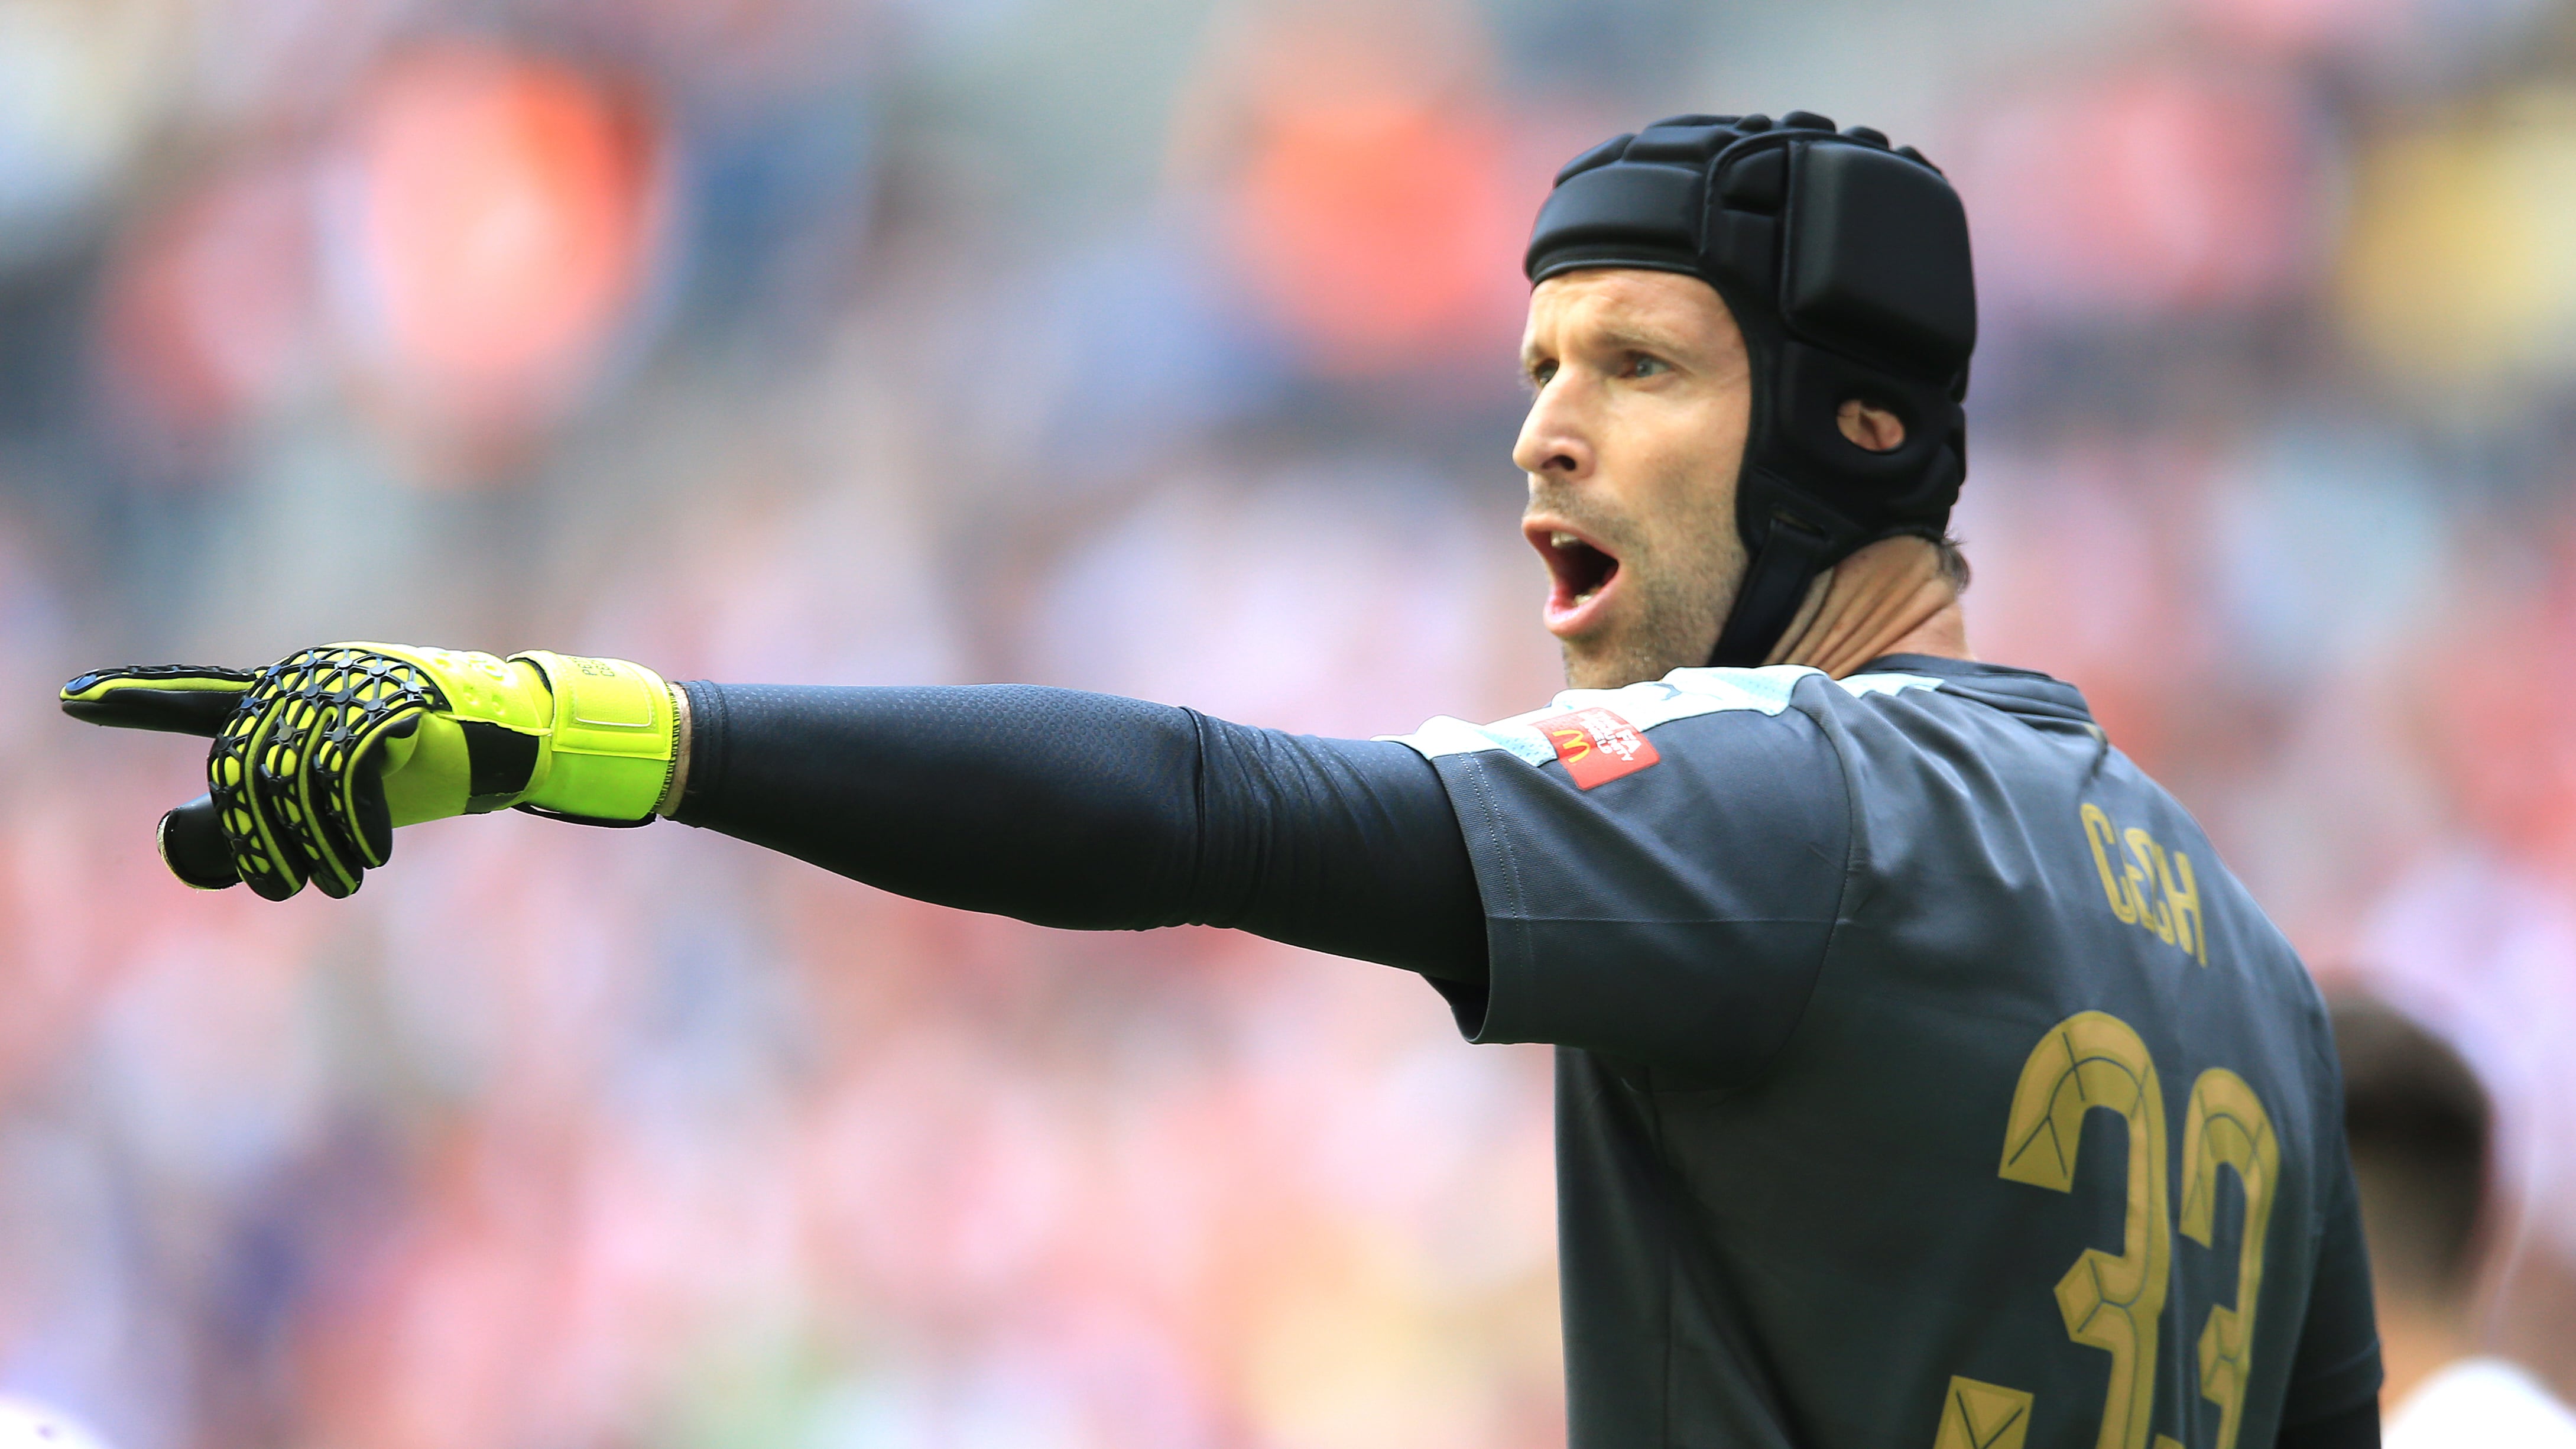 Petr Cech joined Arsenal from Chelsea in 2015